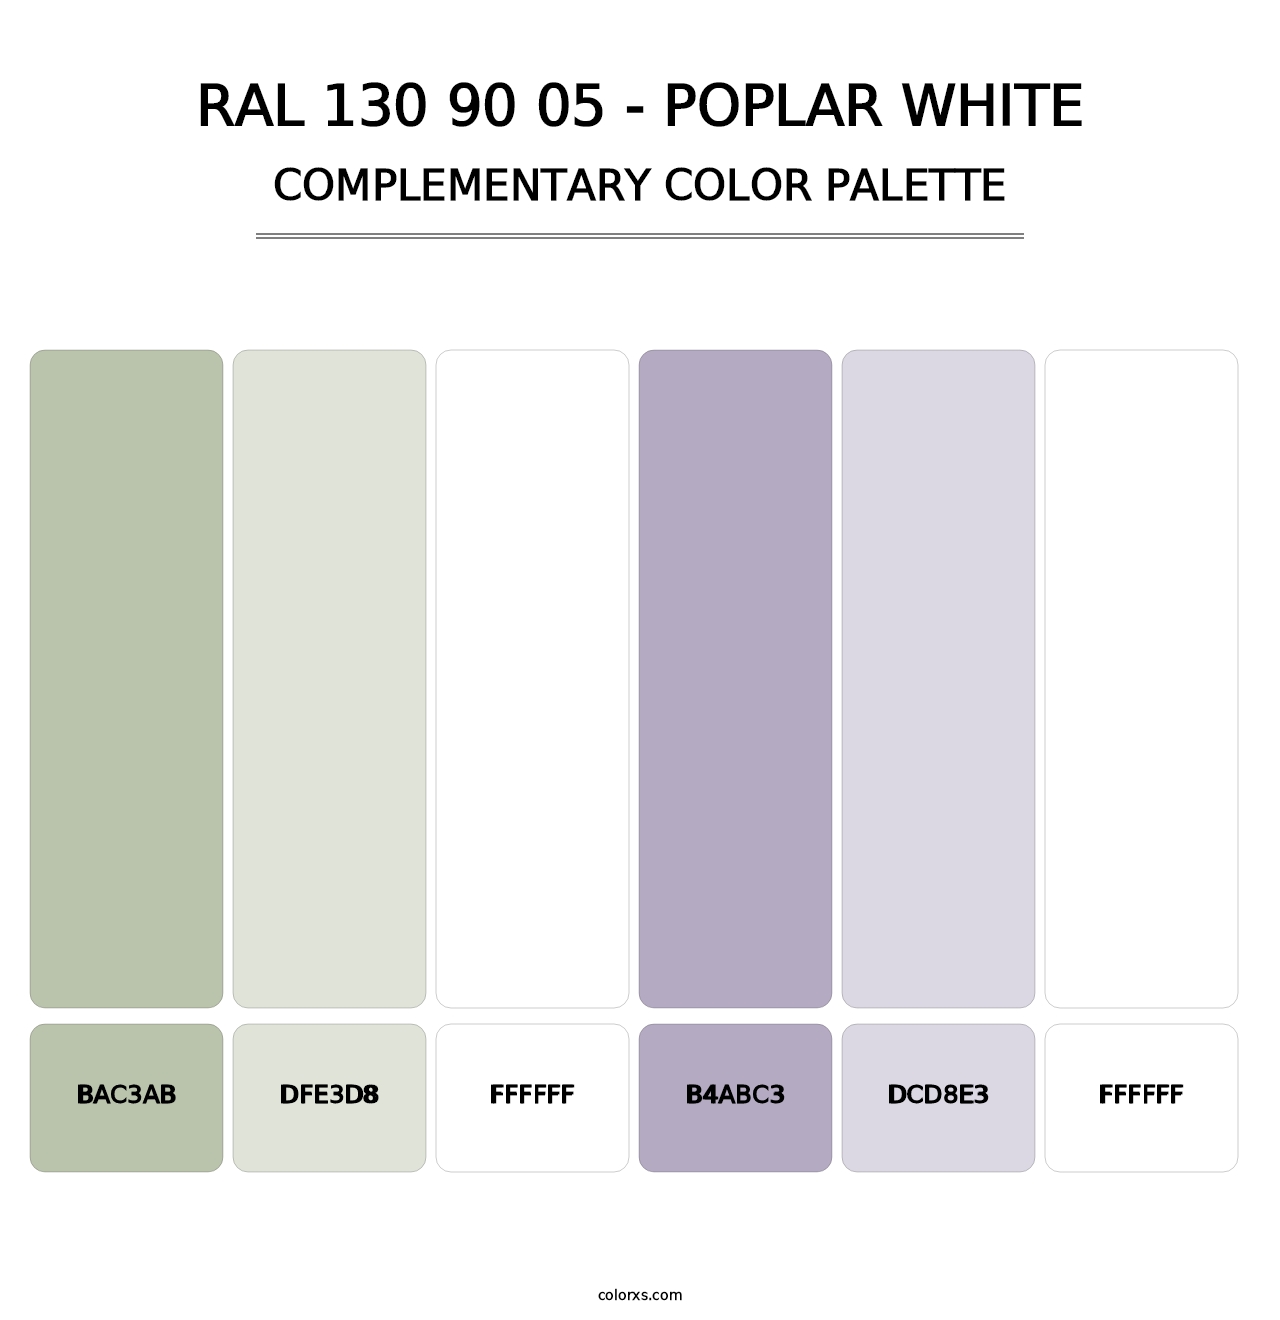 RAL 130 90 05 - Poplar White - Complementary Color Palette